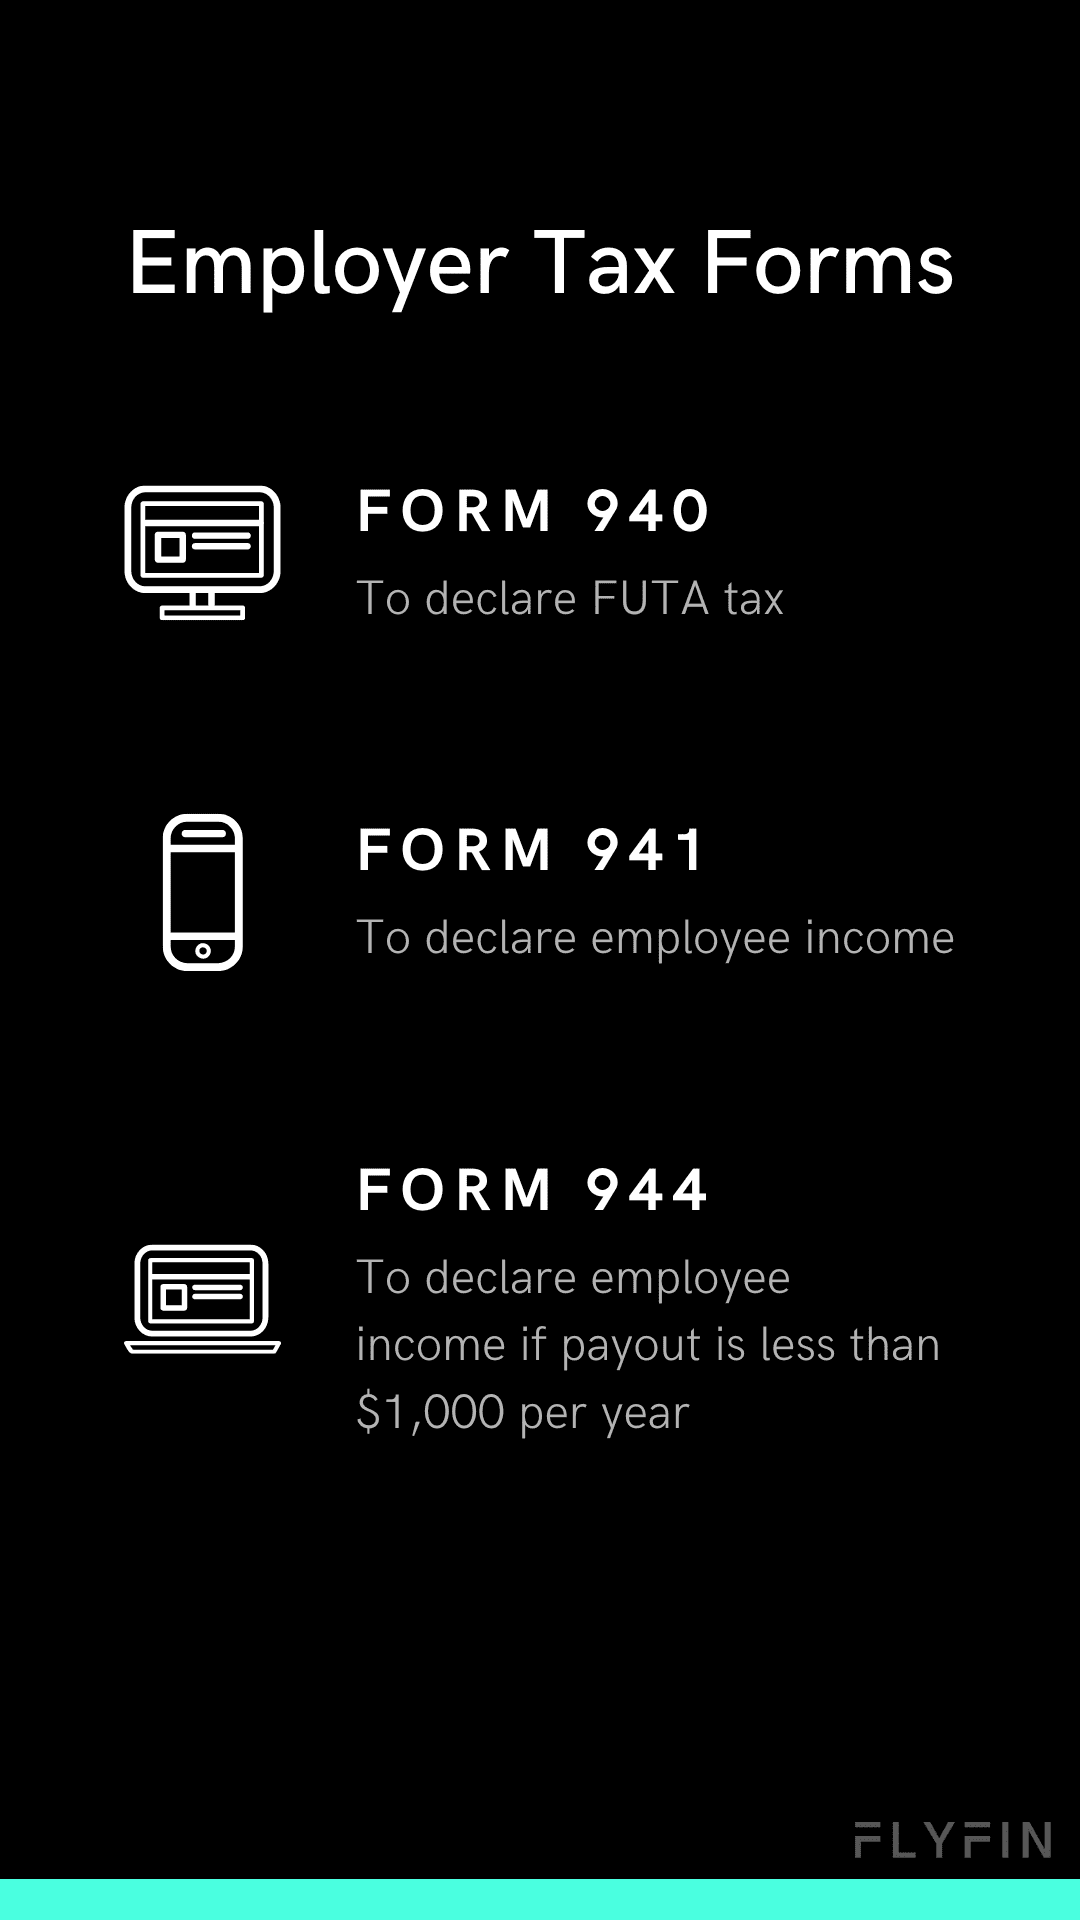 Image of text listing tax forms for employers - FORM 940 for FUTA tax, FORM 941 for employee income, and FORM 944 for employee income under $1,000 per year. No mention of self-employed, 1099, freelancer or taxes.